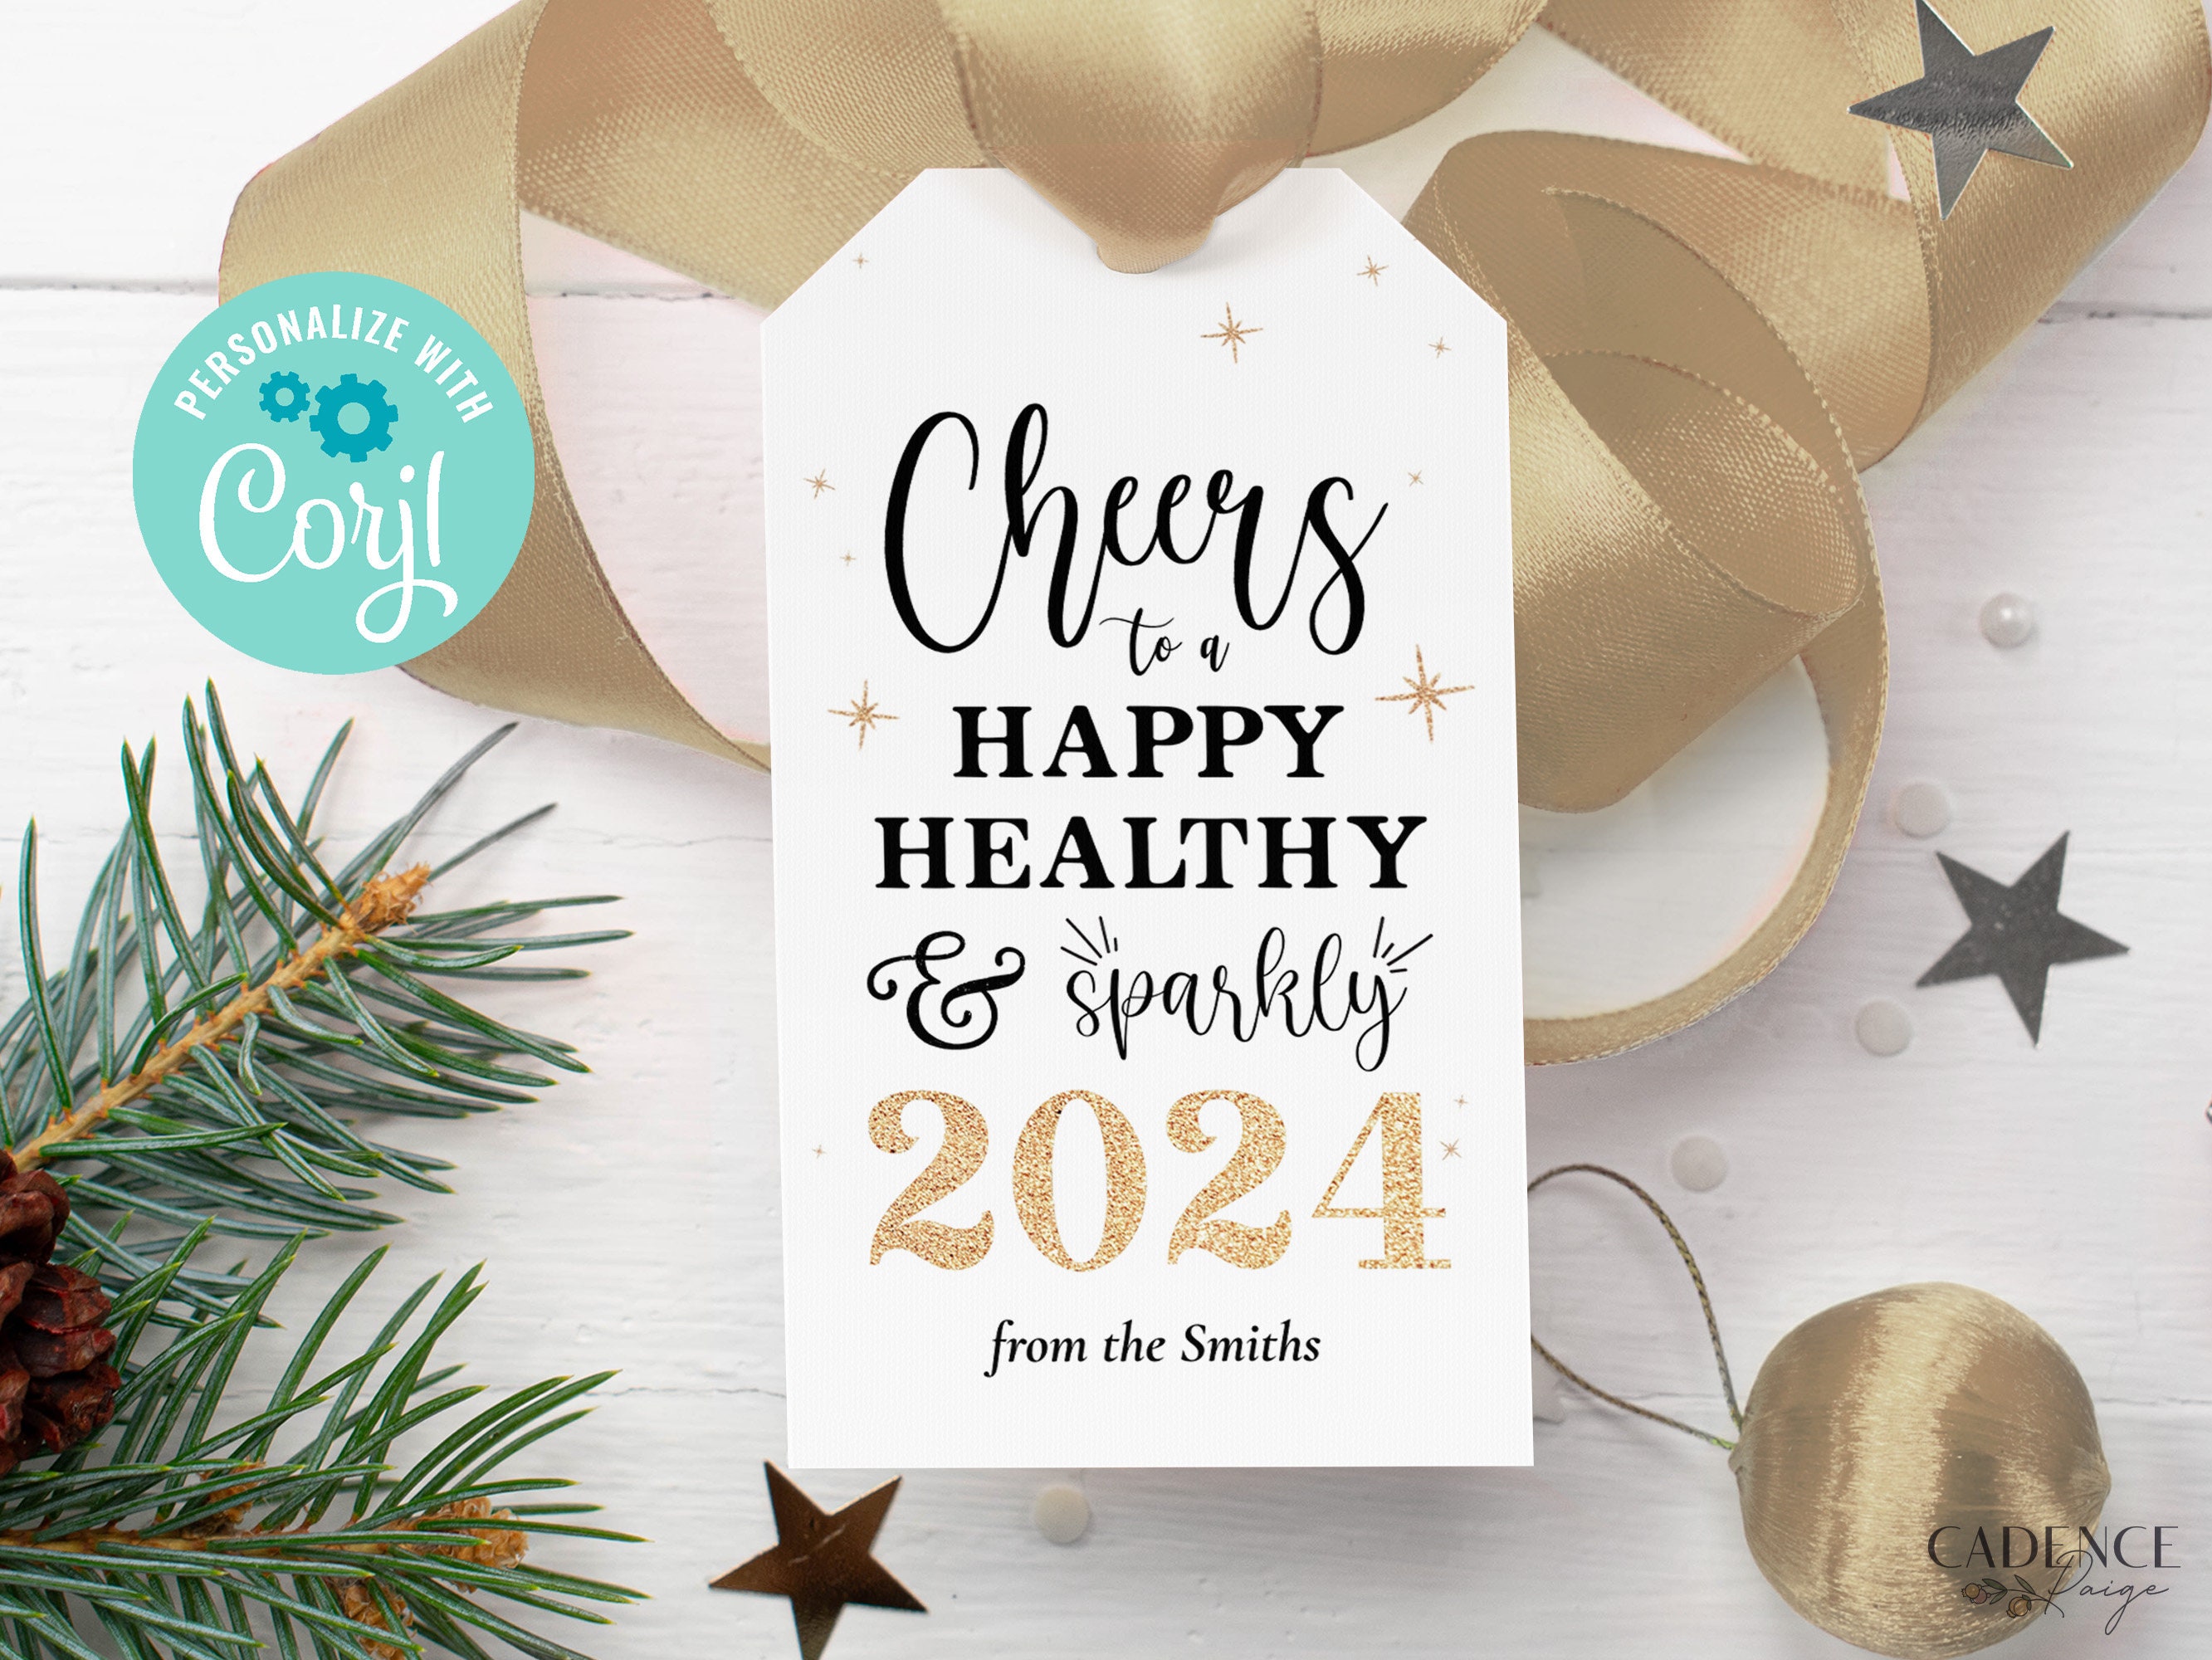 New Year Gifts Ideas 2023: 5 Unique Gift Ideas for Your Loved Ones -  Greetingsit